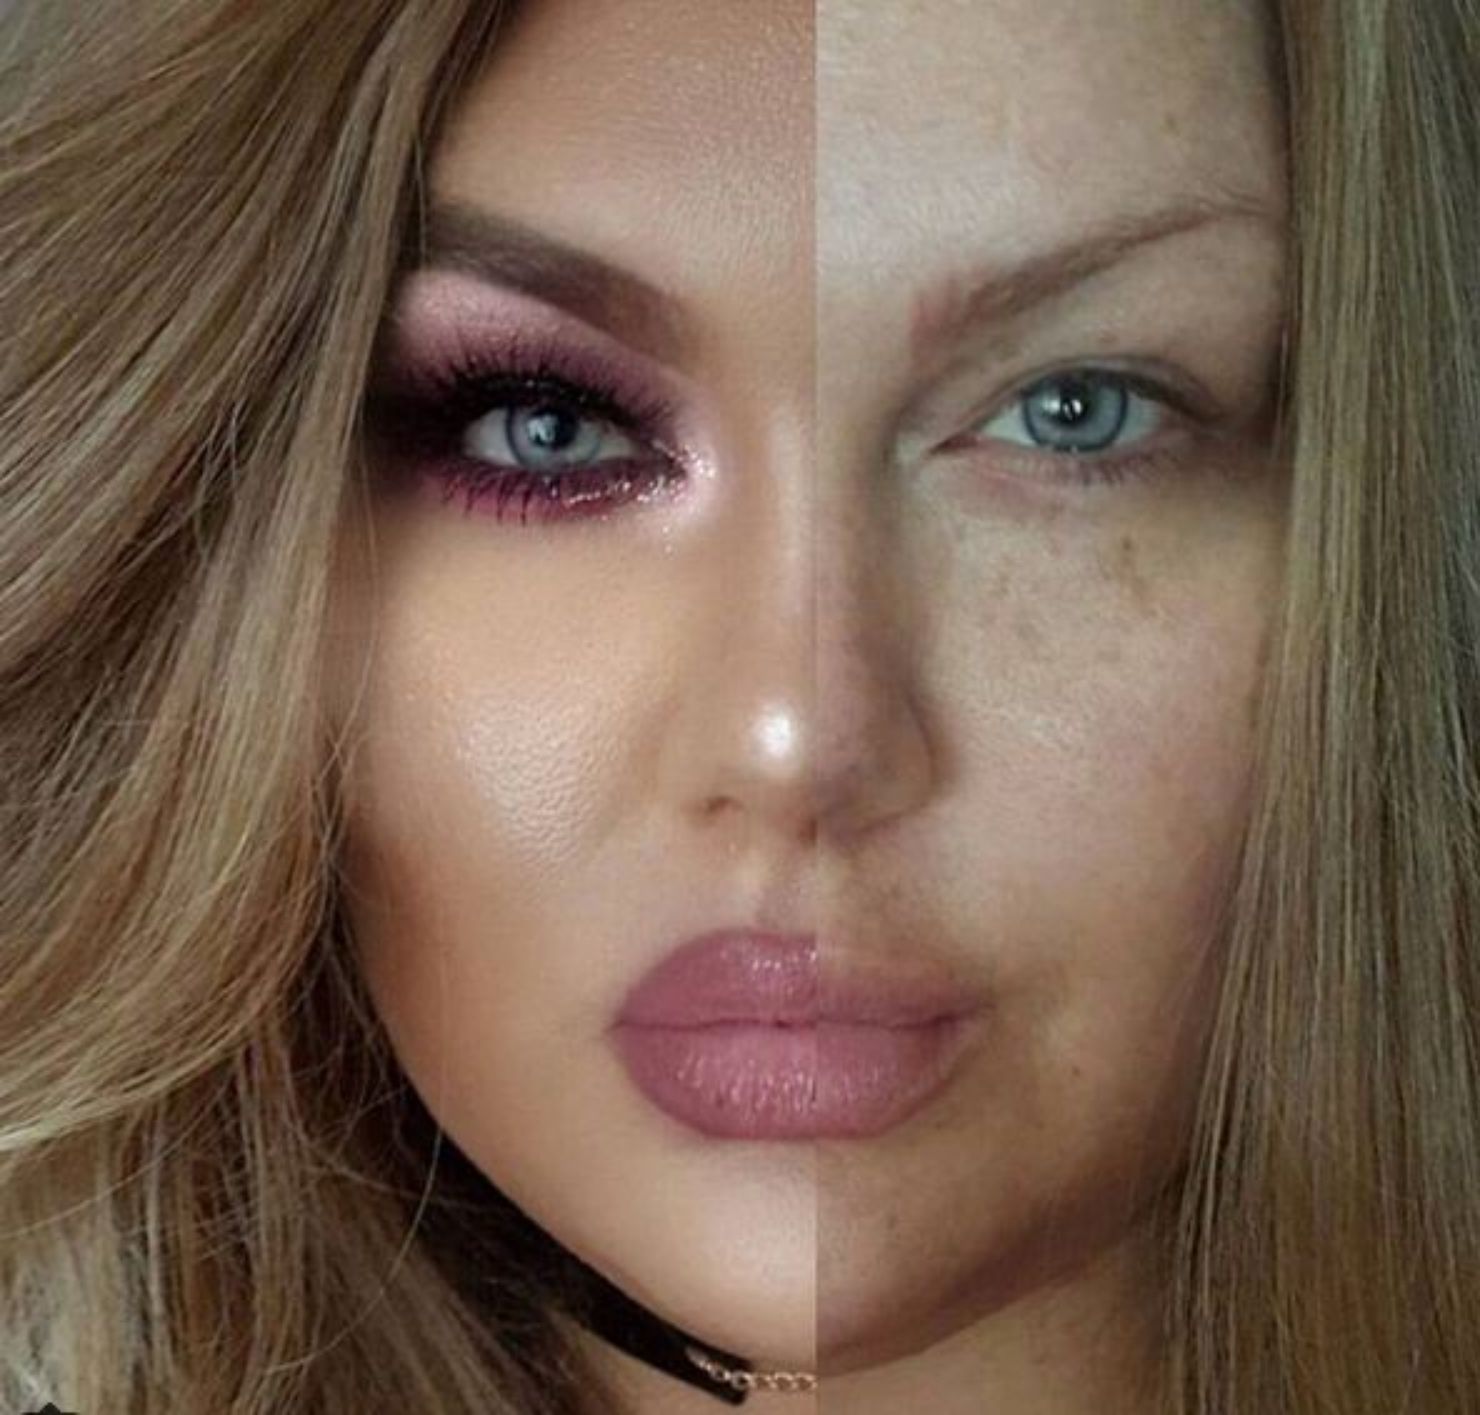 Women Show Half Face With Makeup And Show The Change